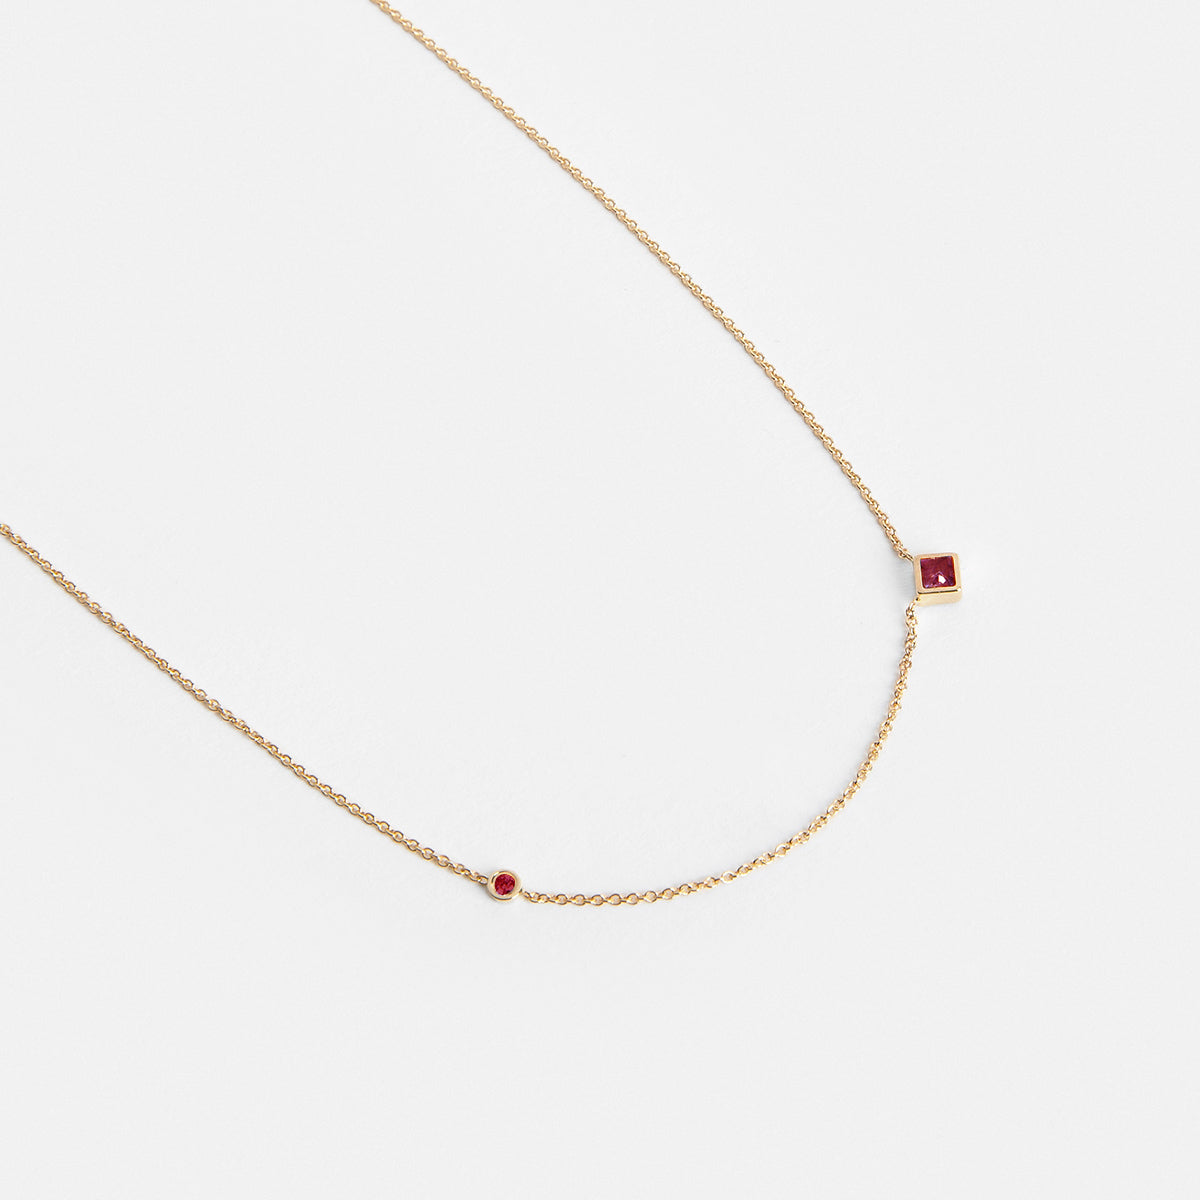 Isu Handmade Necklace in 14k Gold set with Ruby and Ruby By SHW Fine Jewelry NYC